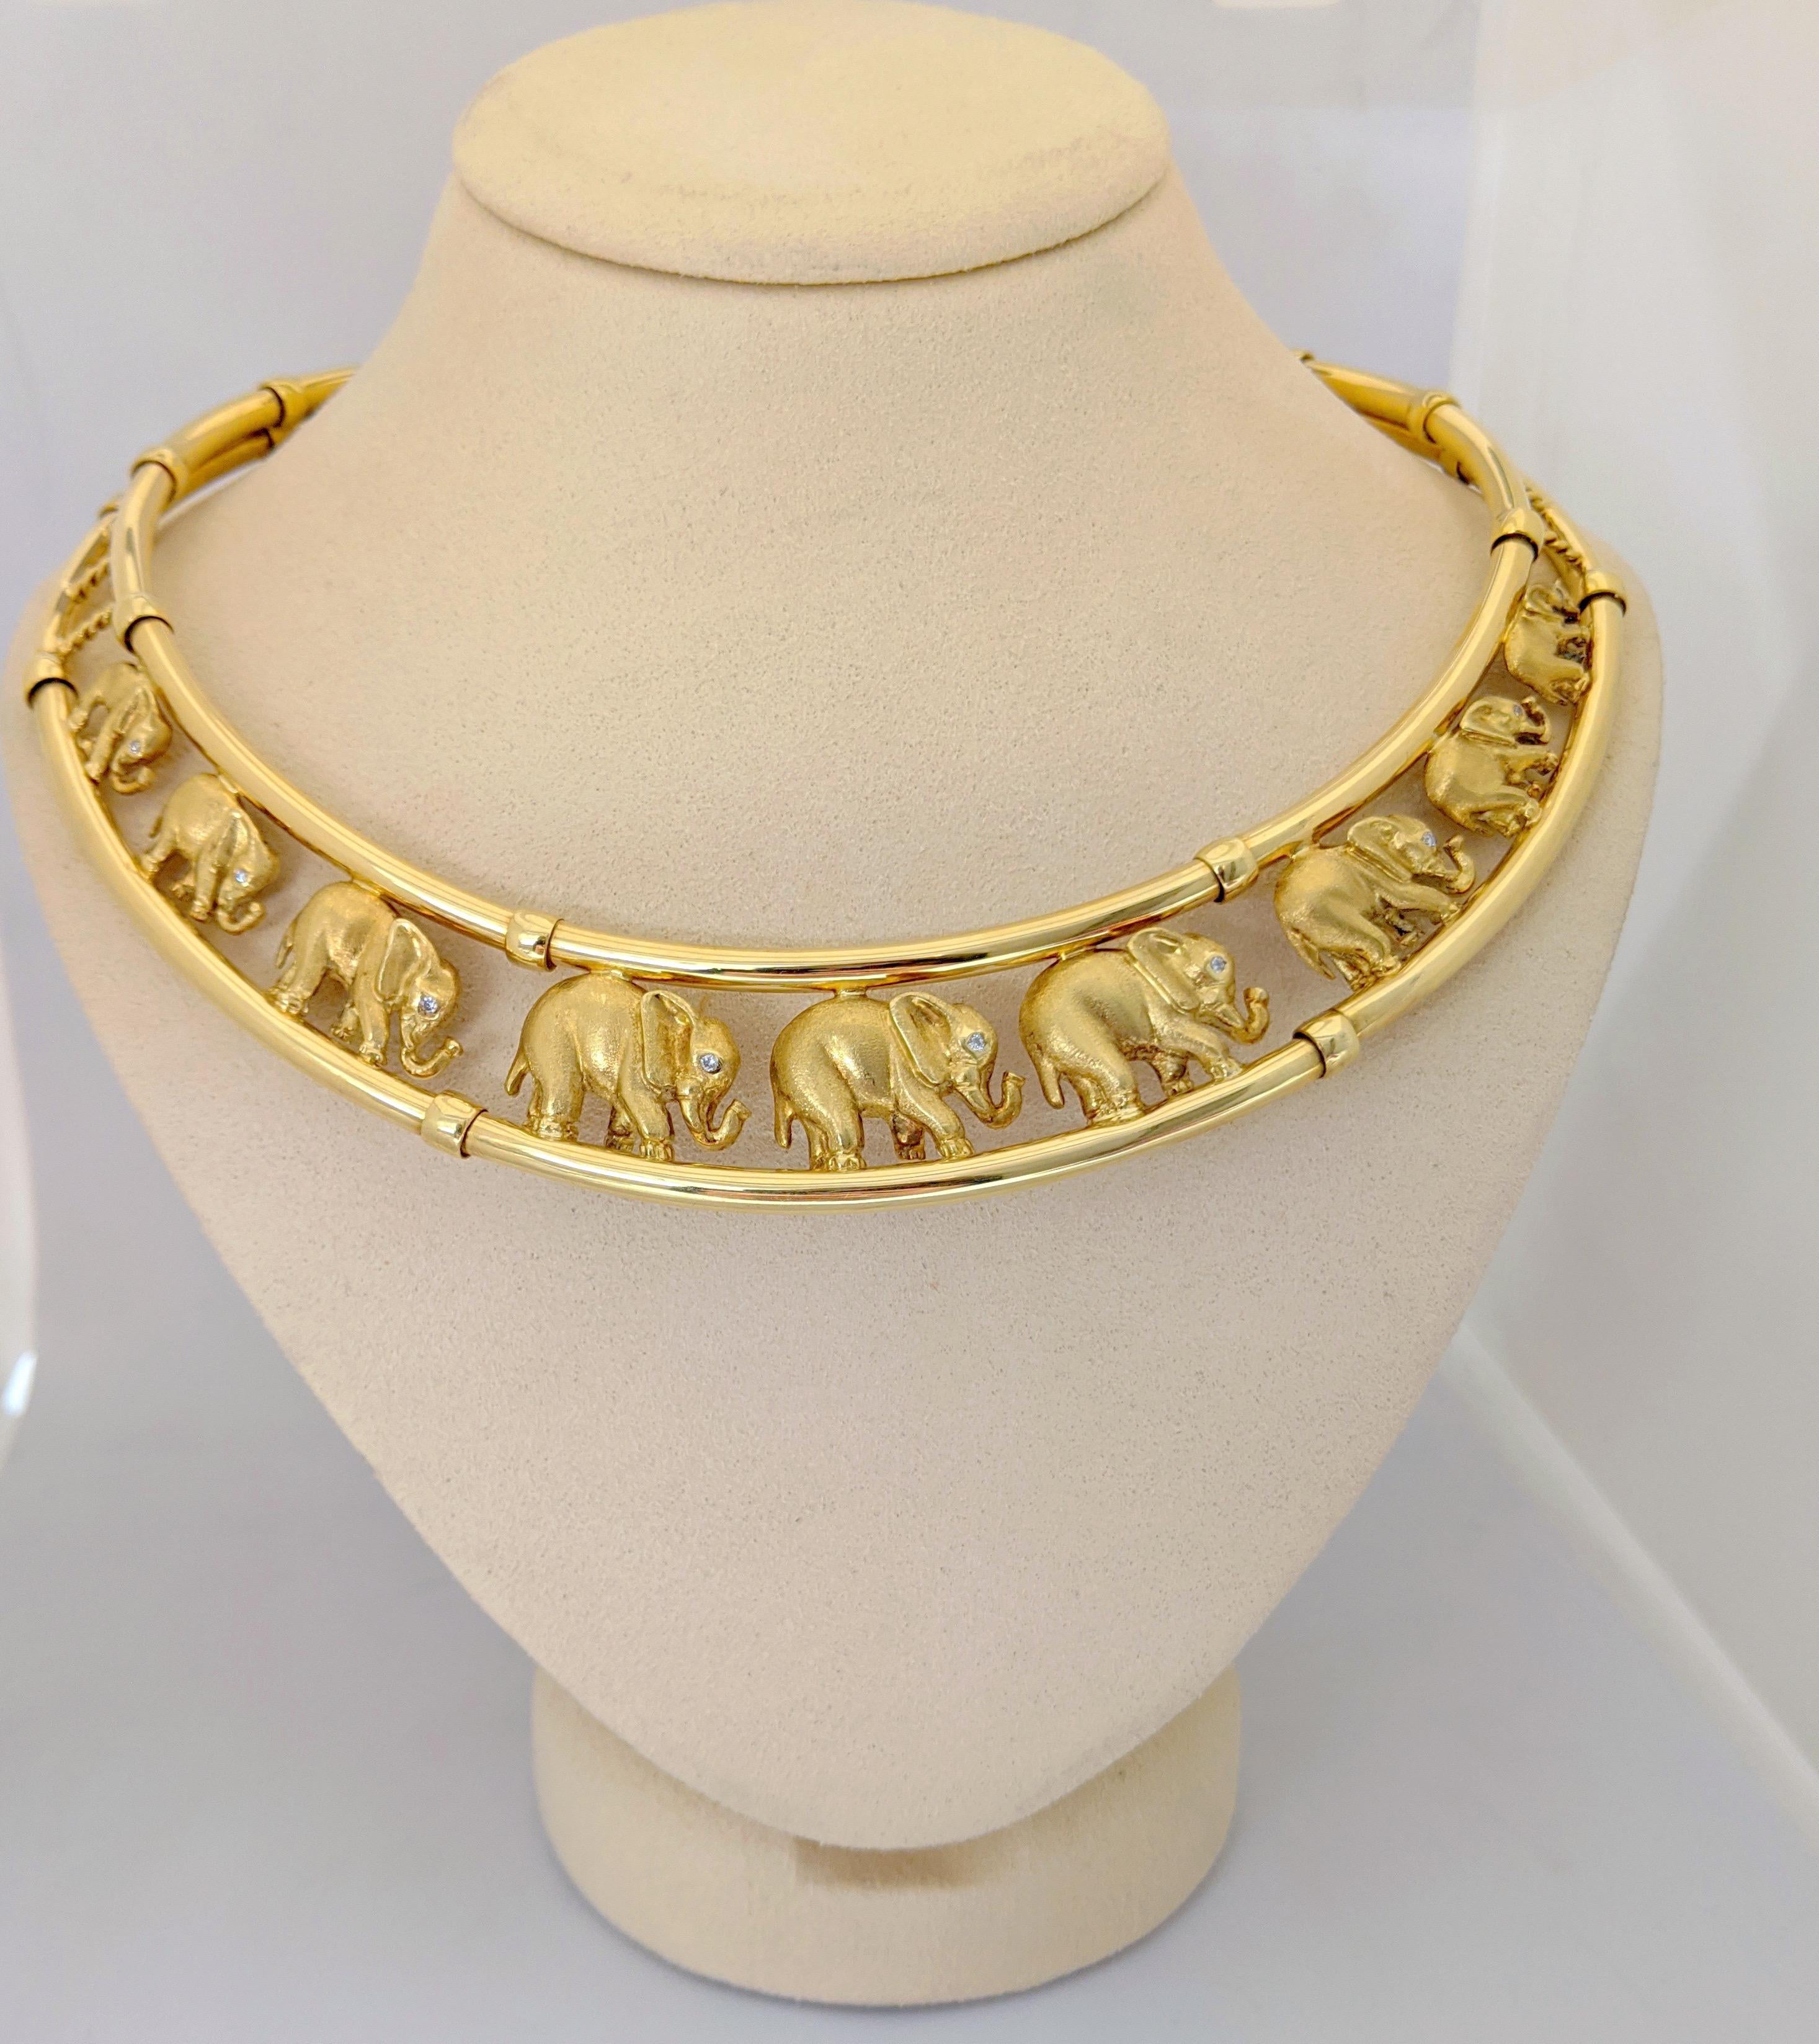 Round Cut Roberto Coin 18 Karat Yellow Gold Vintage Collar Necklace with 9 Elephants